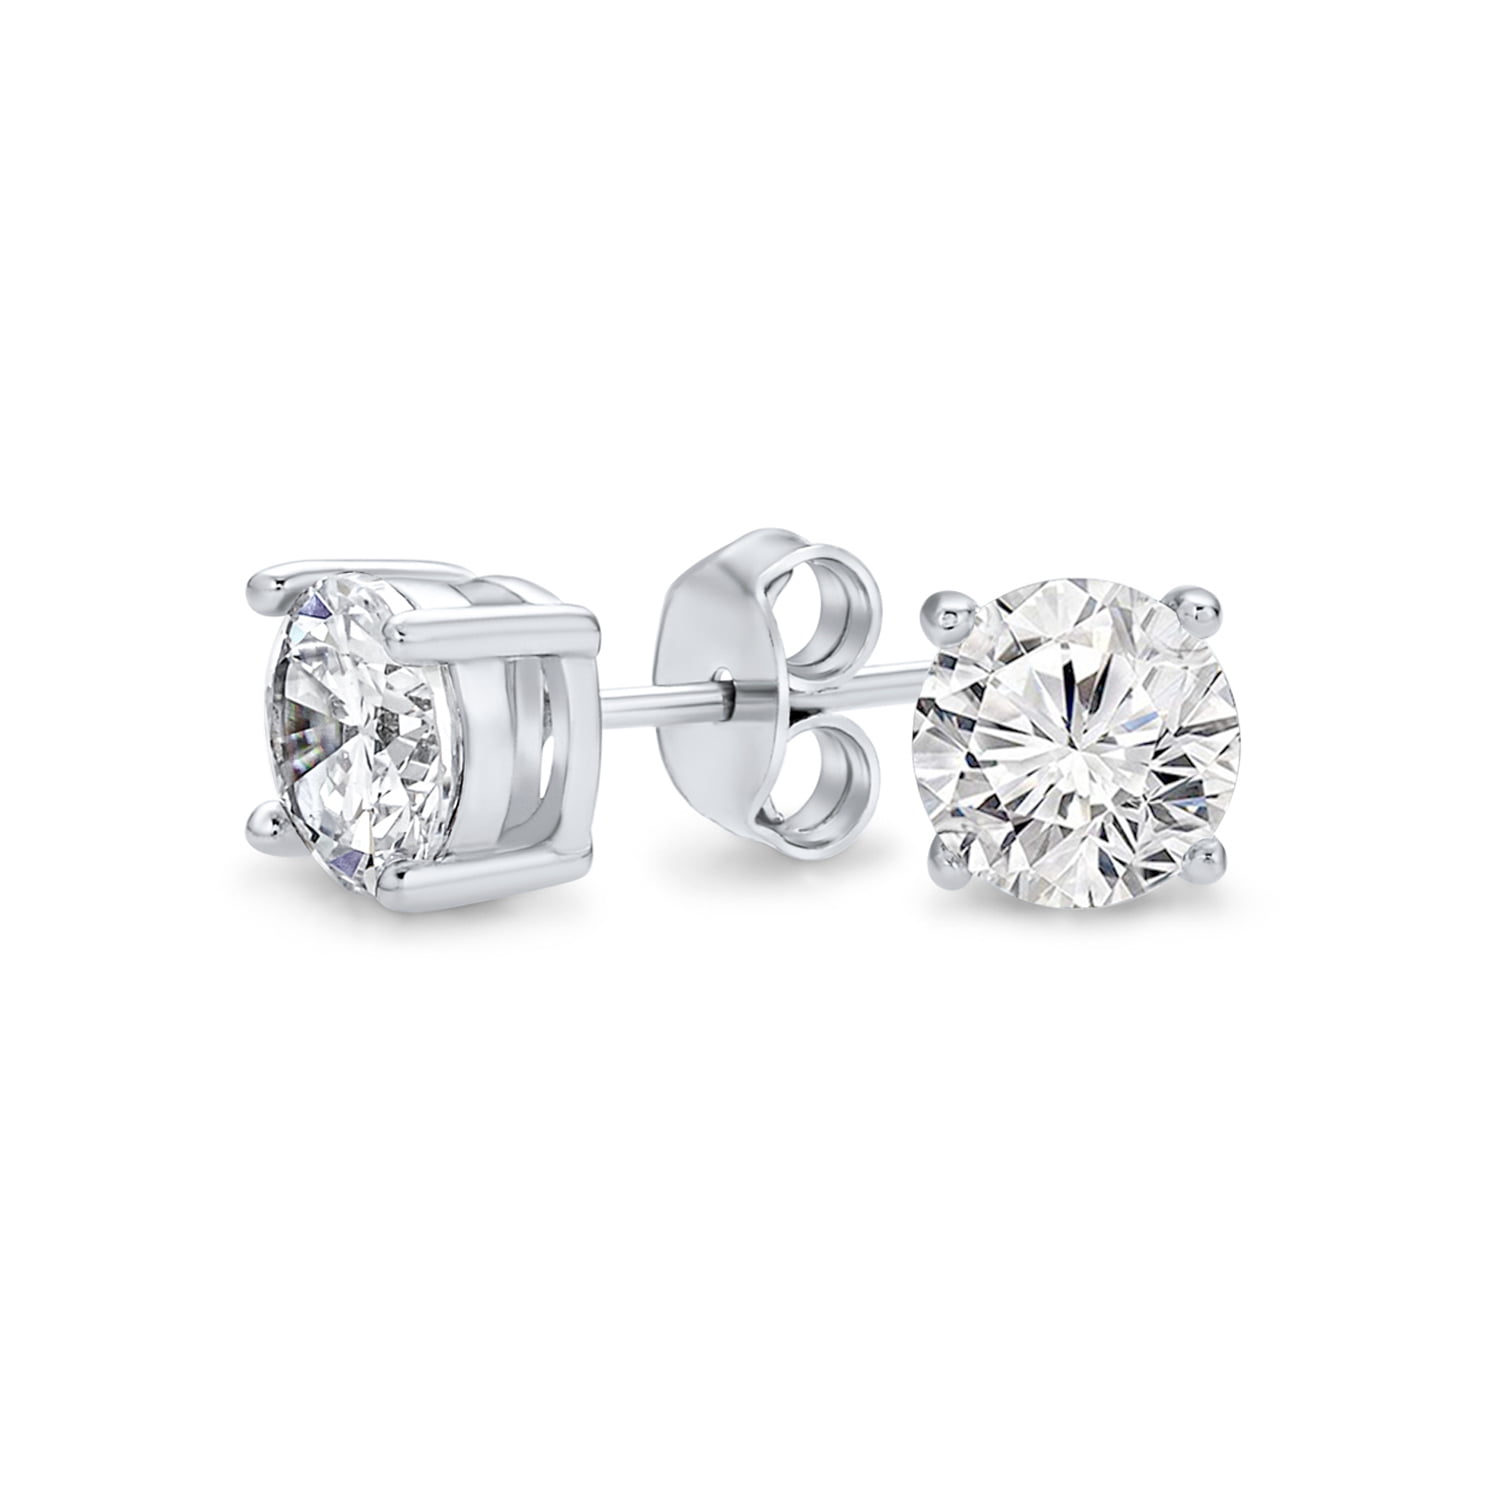 14k White Gold 4mm Round CZ Solitaire Basket Setting Stud Earrings